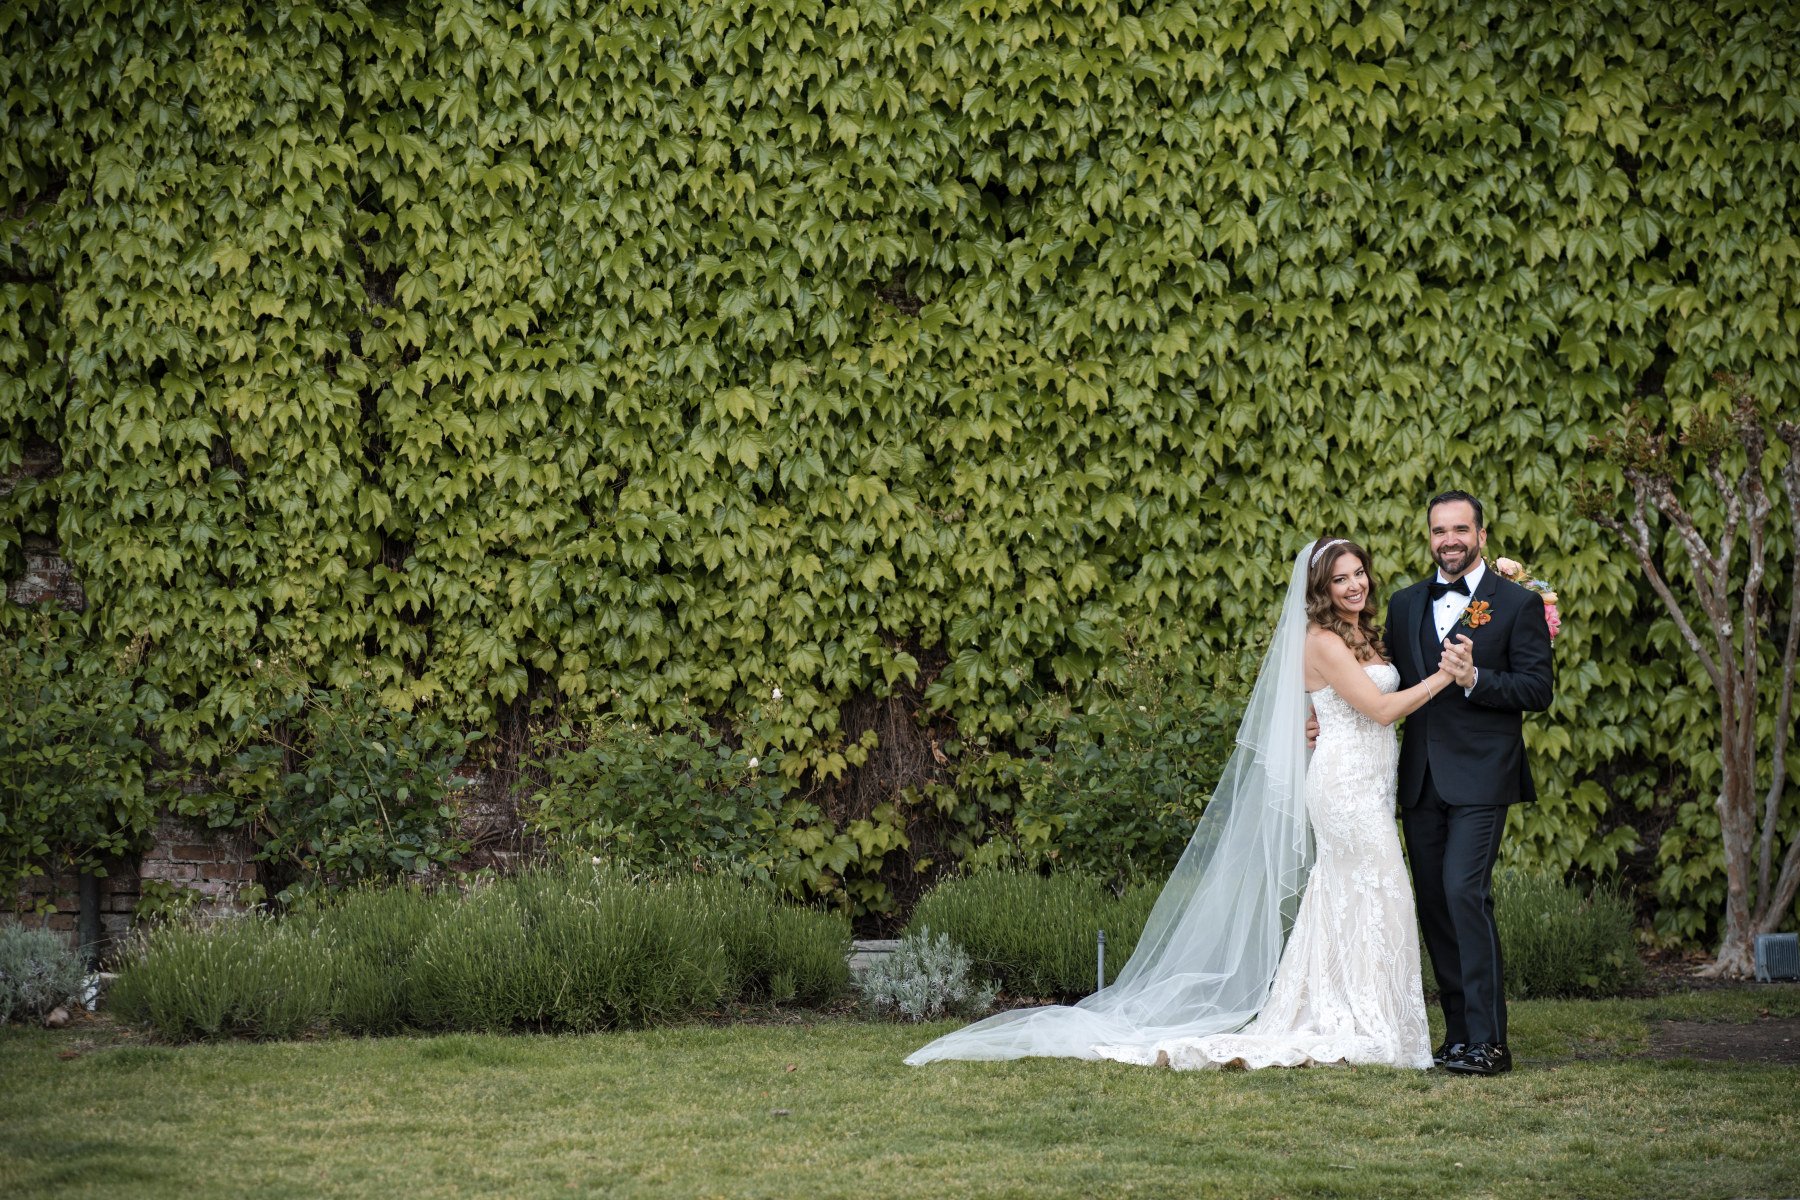 This Napa Valley wedding at the Estate Yountville Wedding venue show  a smiling bride and groom.  Wedding planned by Blissful Events. Photo by Lily Rose.